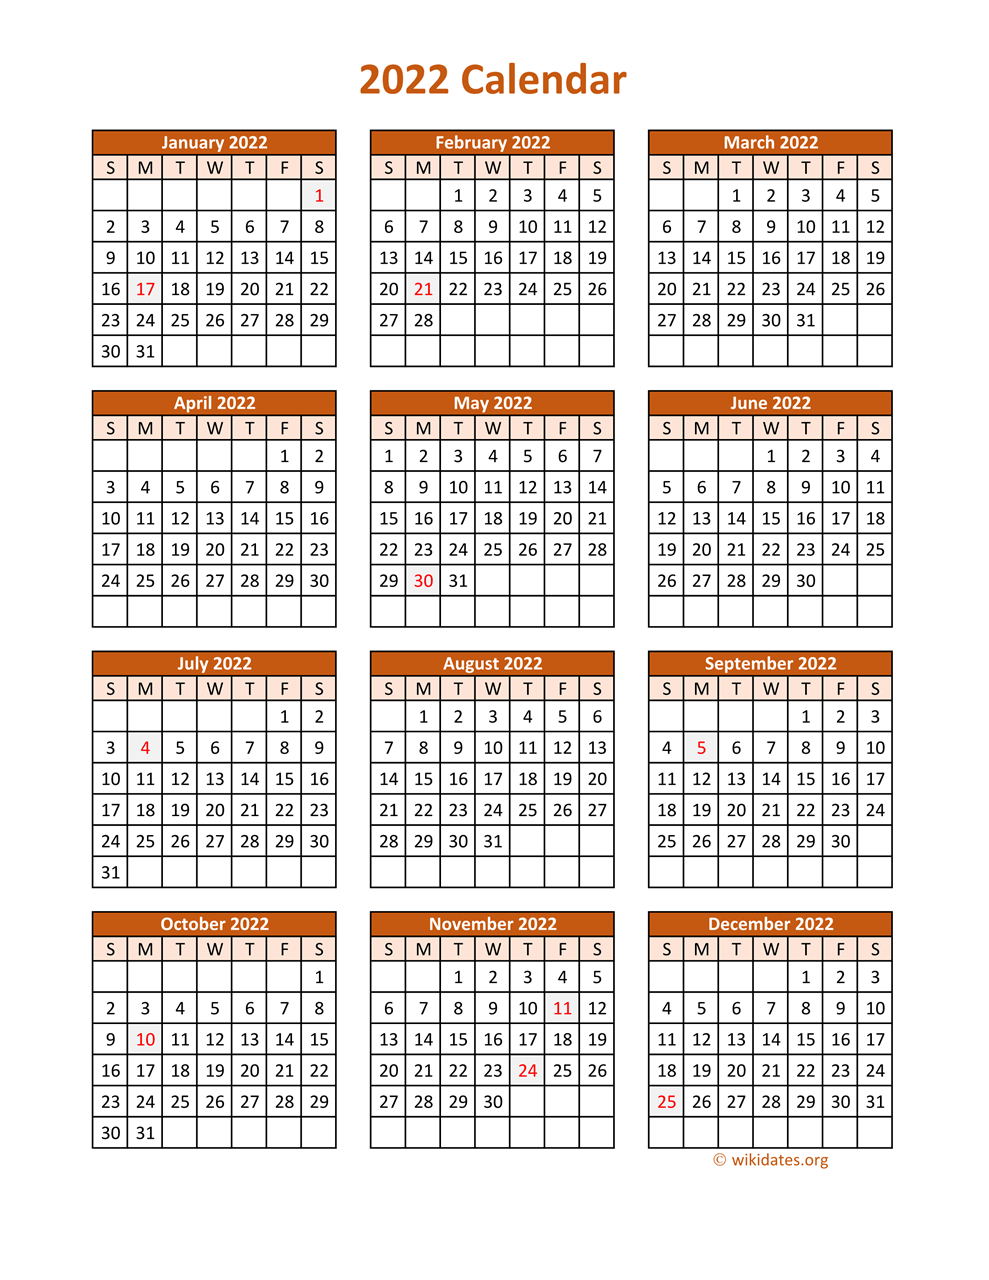 Full Year 2022 Calendar On One Page | Wikidates